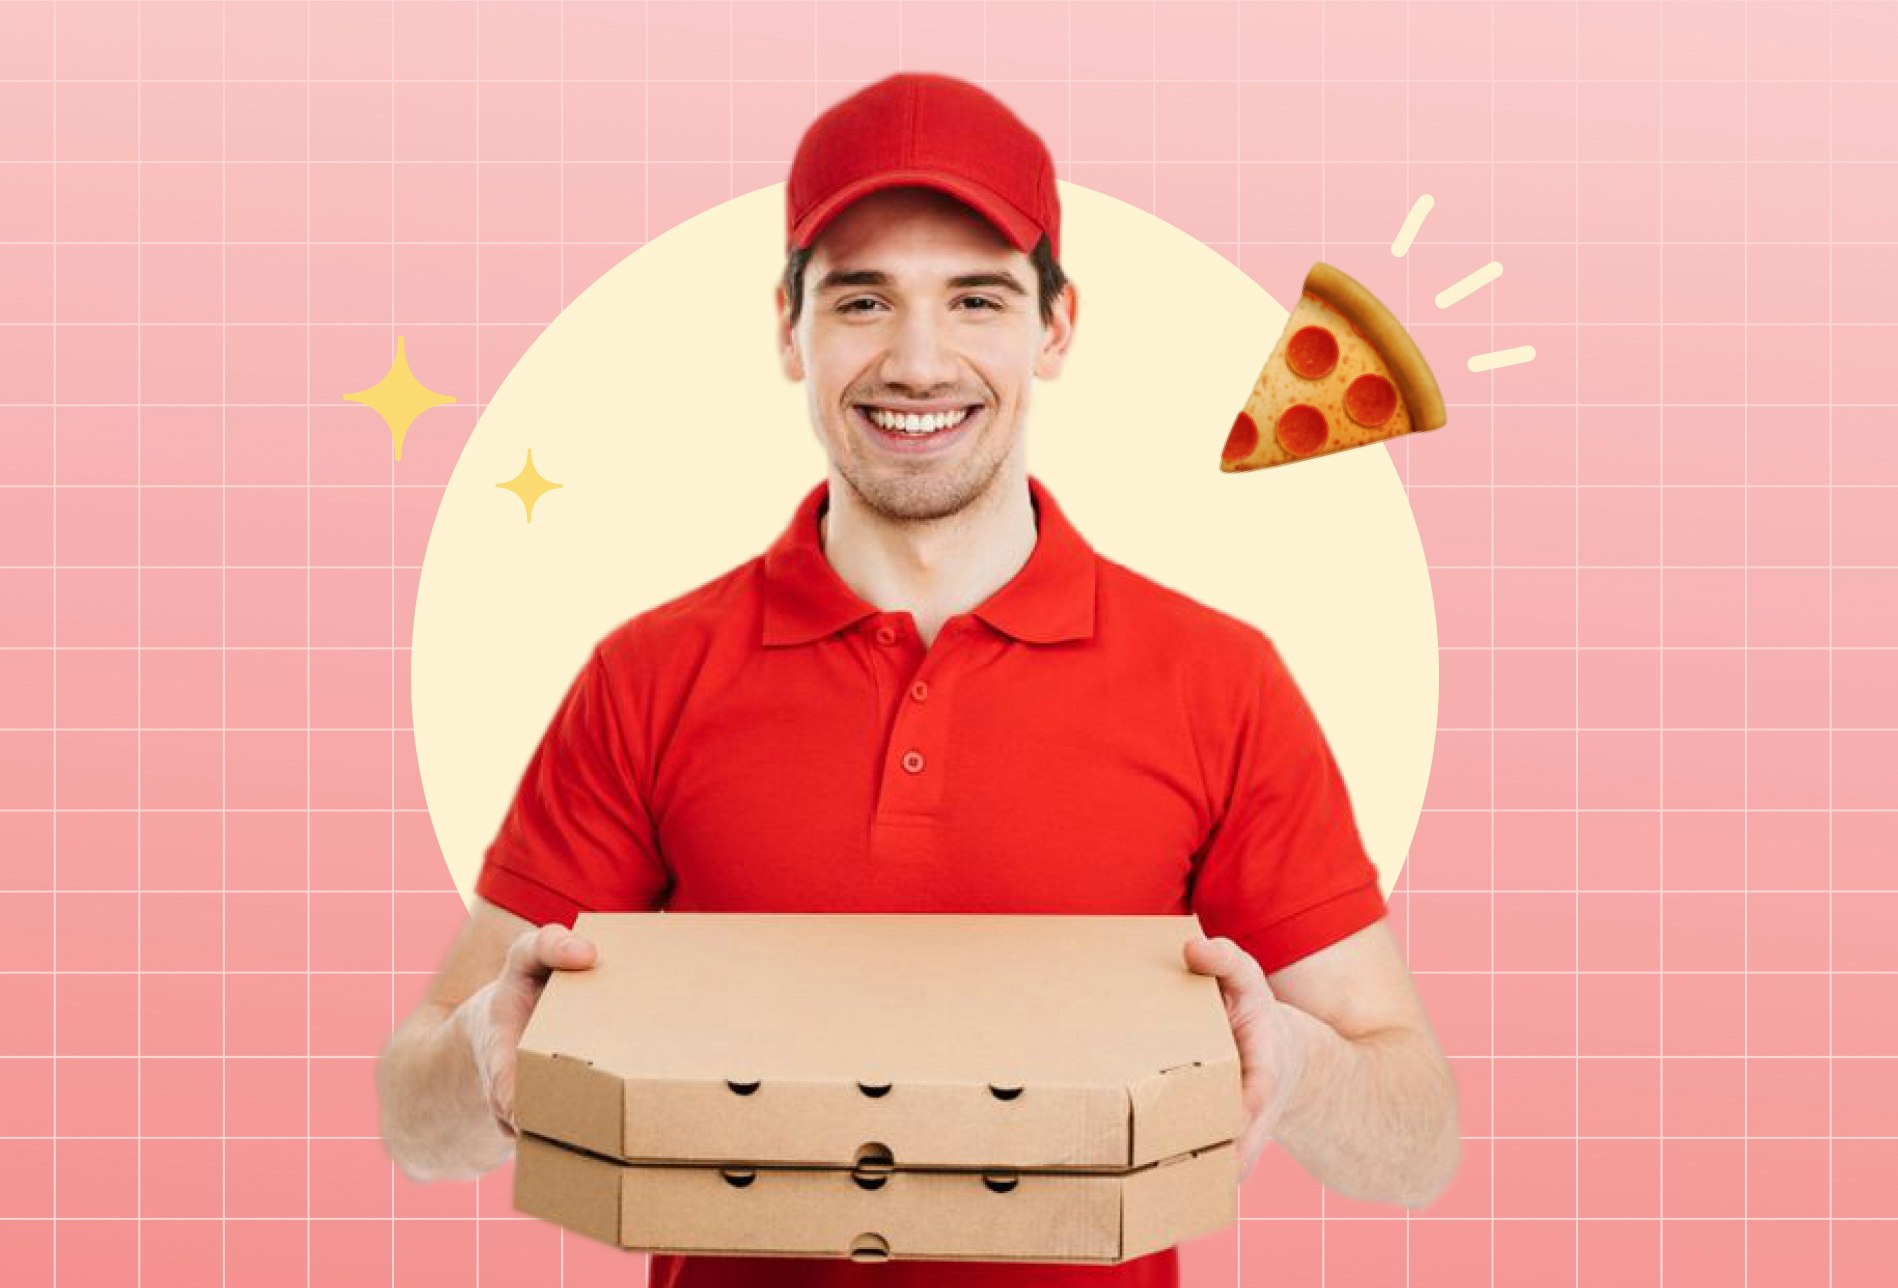 pizza delivery person with pizza boxes